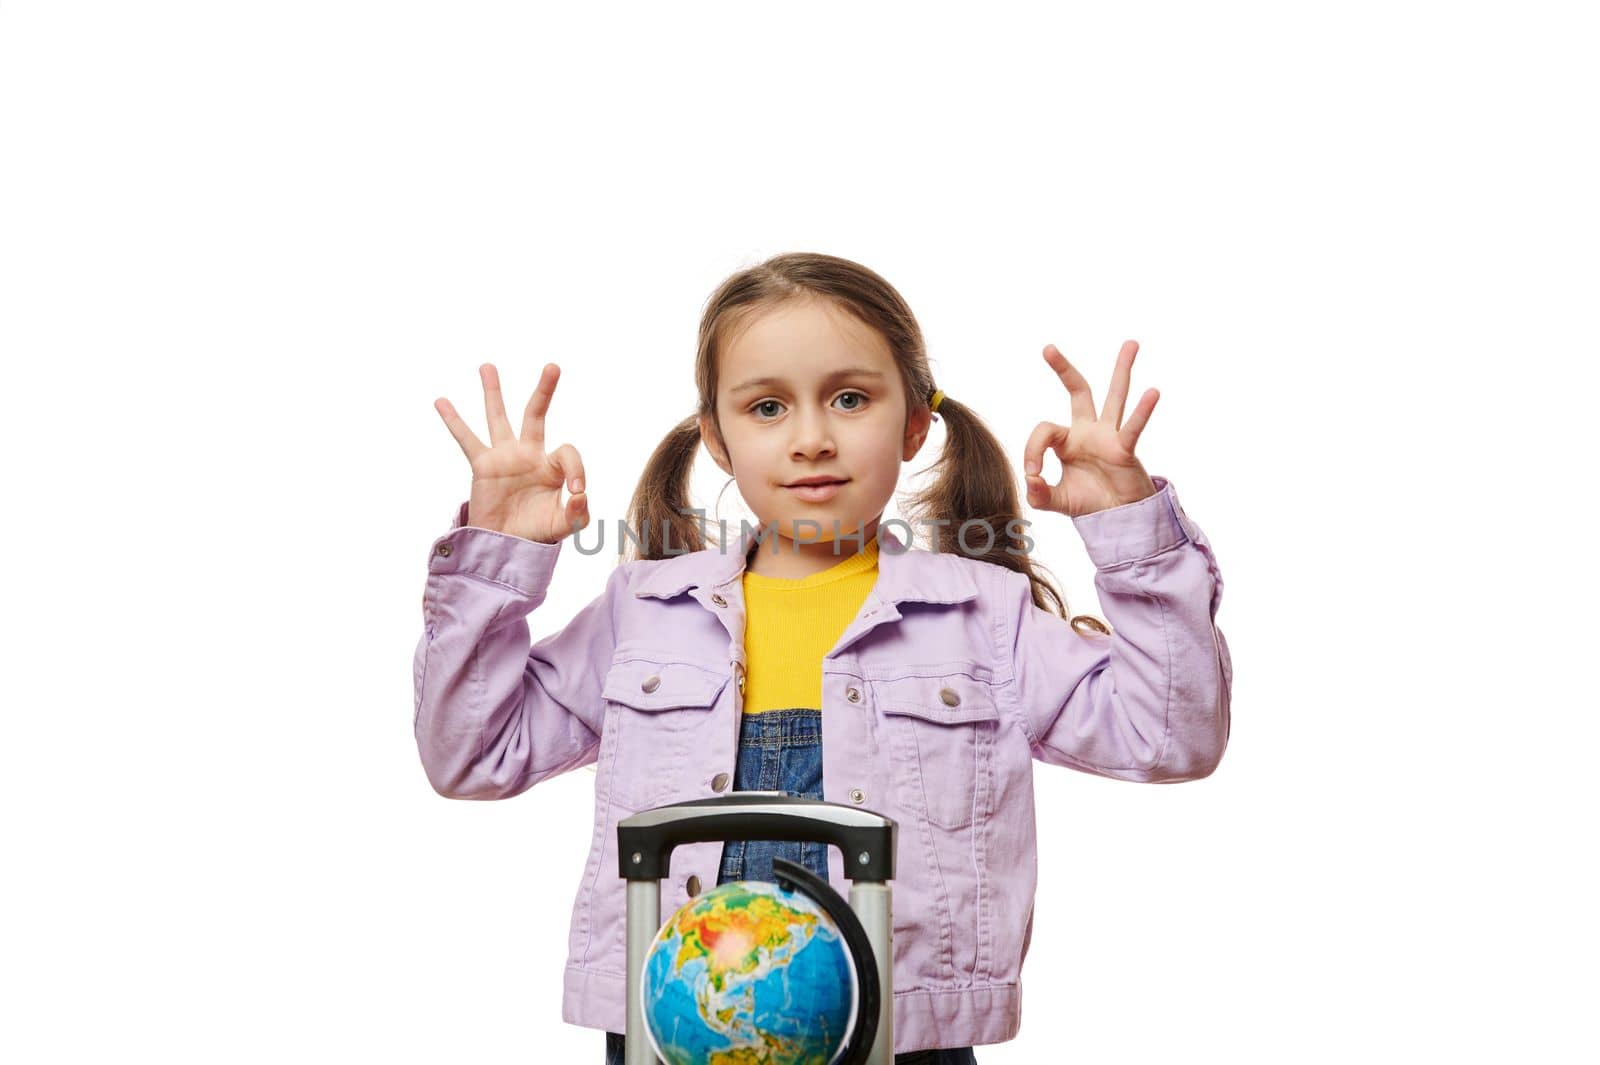 Adorable little traveler girl standing next to the globe on yellow suitcase, demonstrating OK sign looking at camera by artgf